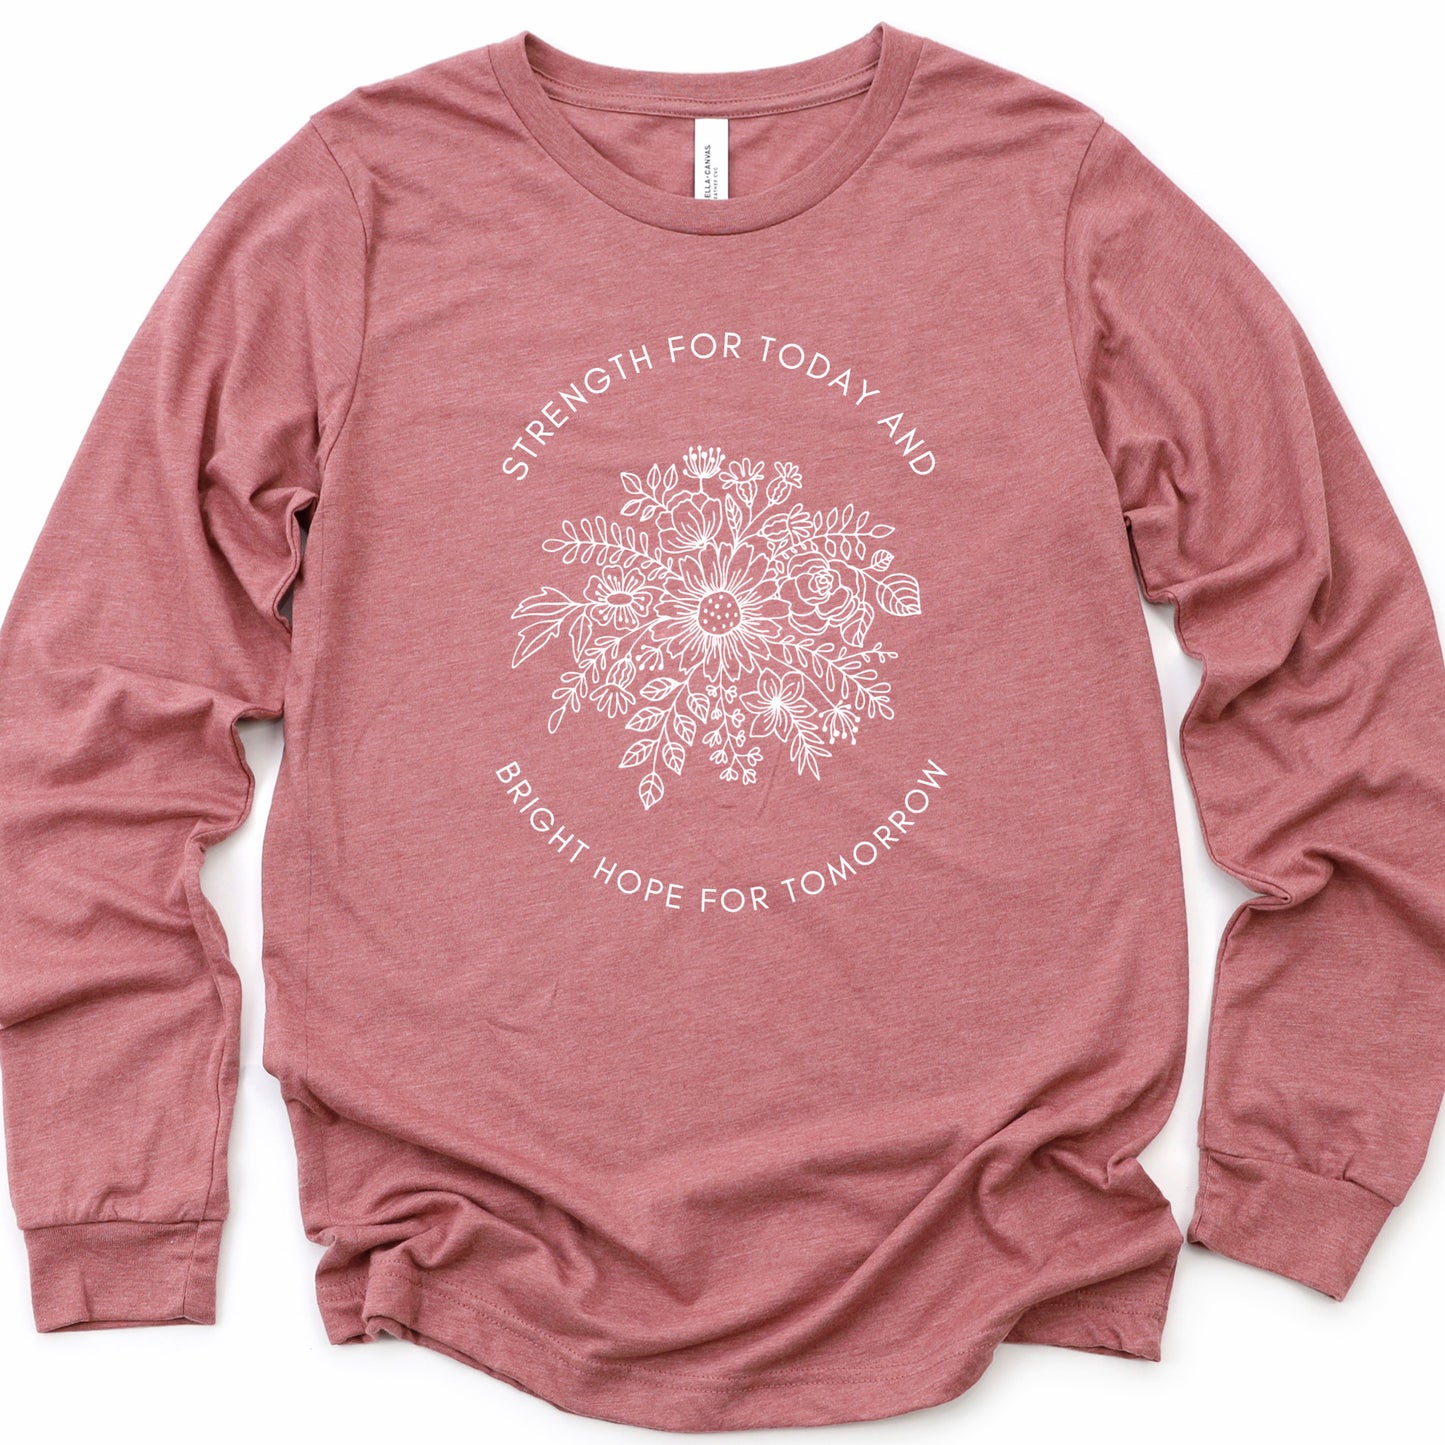 Strength For Today & Bright Hope For Tomorrow | Adult Long Sleeve